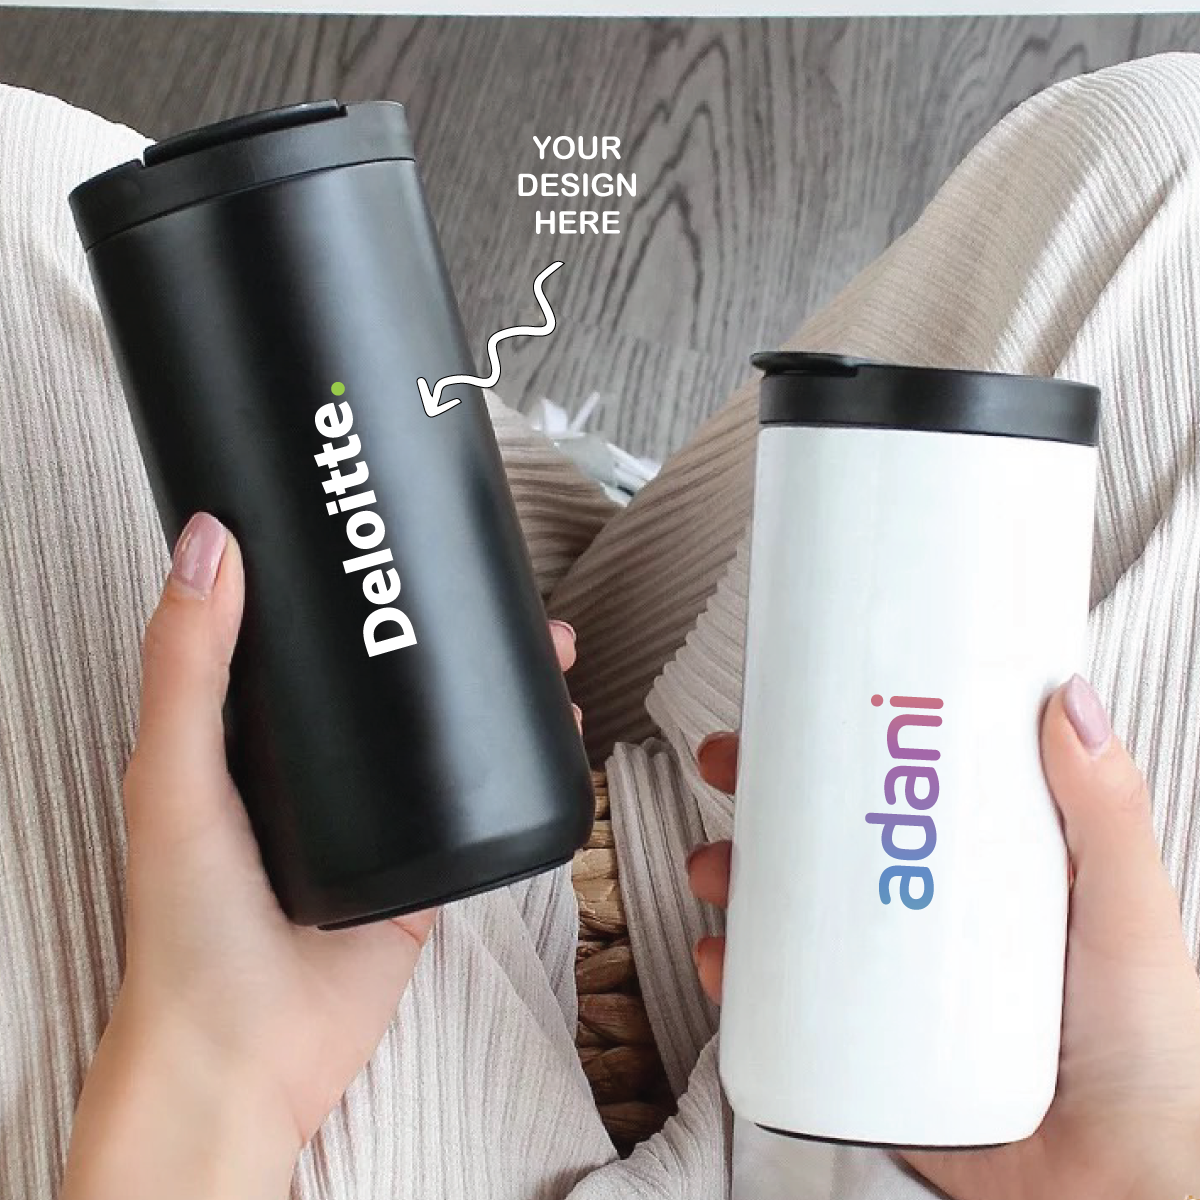 Personalized Insulated Travel Coffee Tumbler Cup - For Corporate Gifting, Return Gift, Gifts for Events Promotional Giveaway, Employee Stakeholder Customer Gifting - TGMGC186-87-88-89